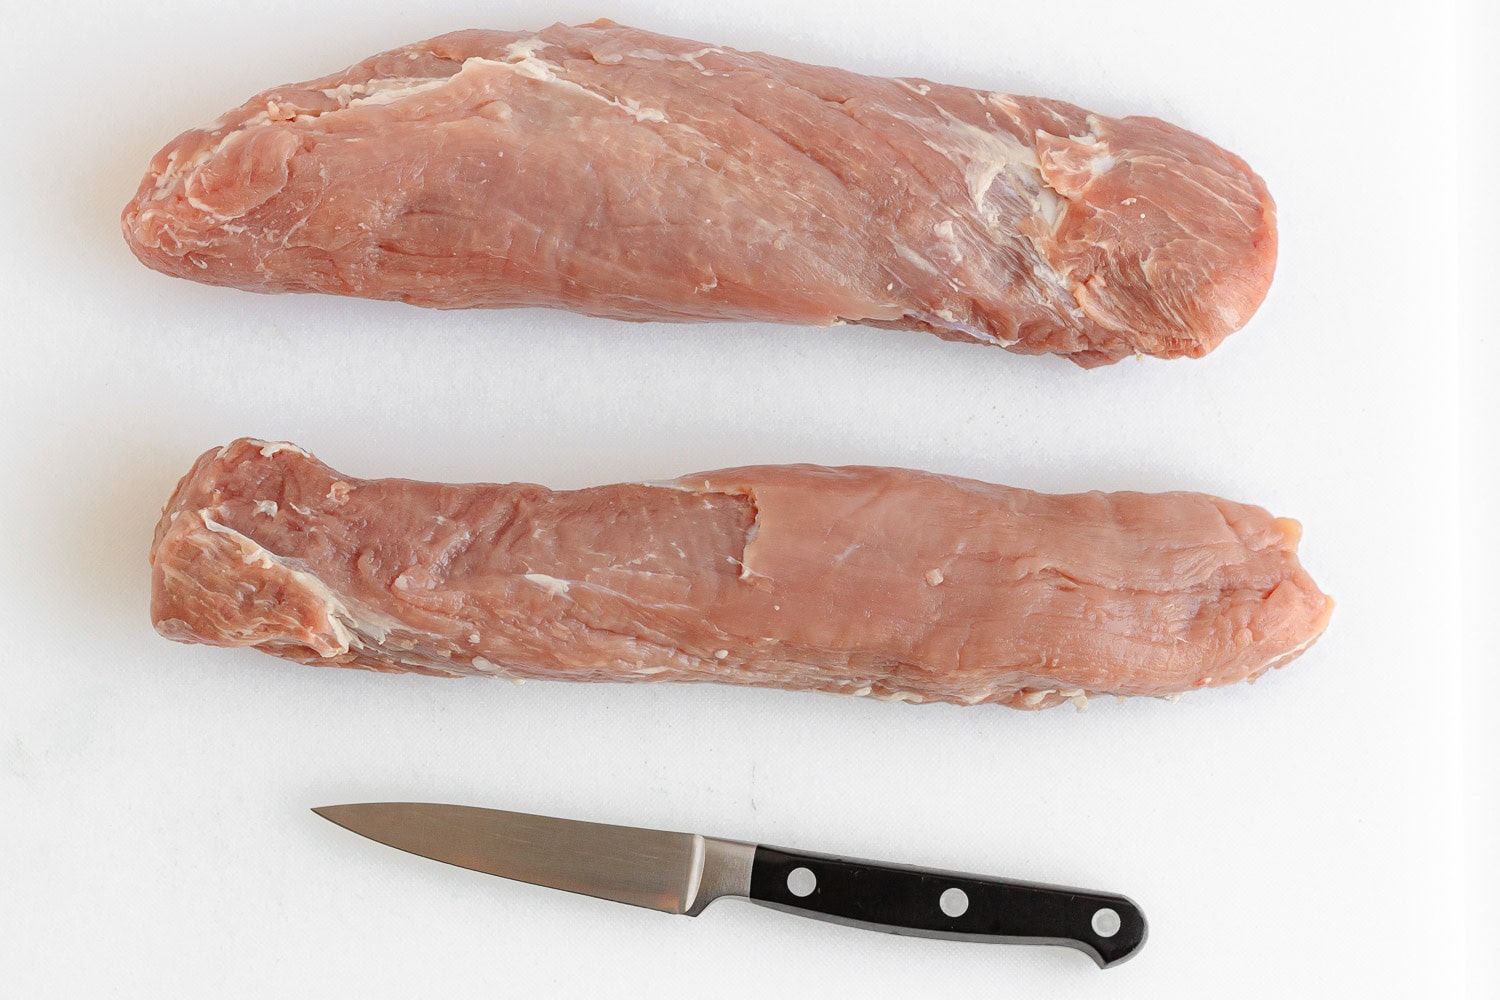 Two trimmed pork tenderloin on a white plastic cutting board with knife.